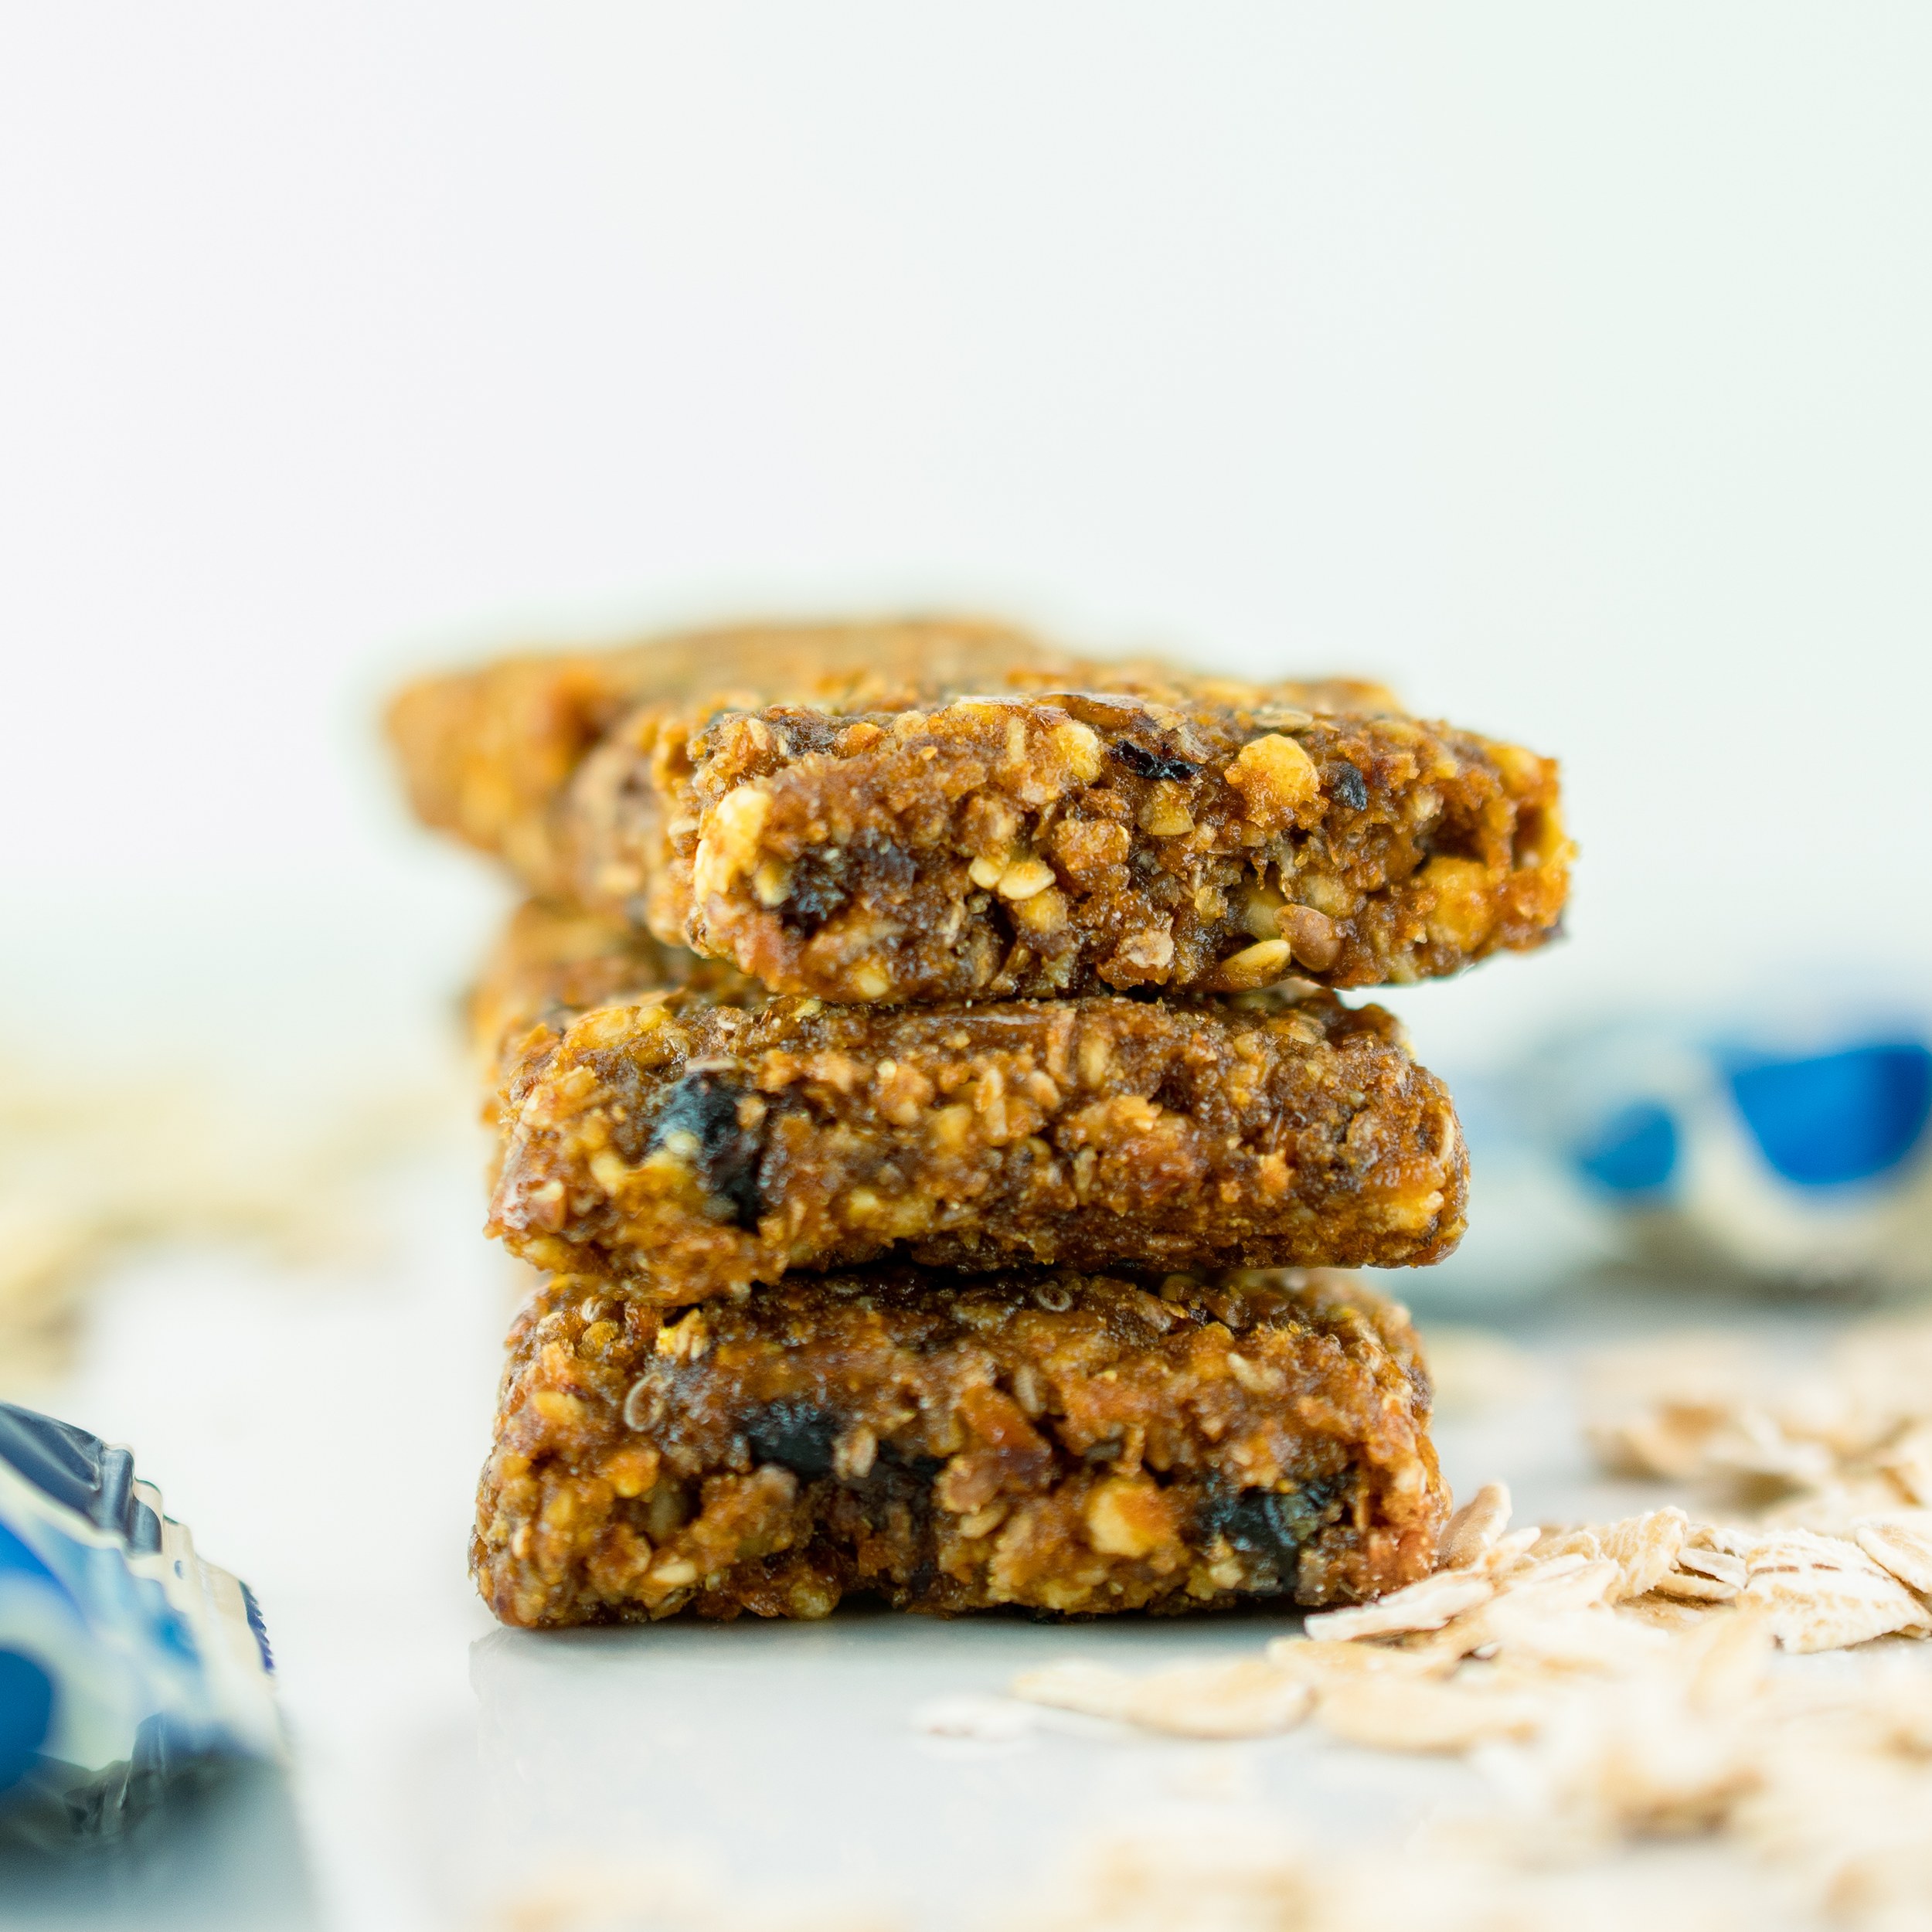 NuGo Fiber Blueberry Bars out of wrappers and stacked